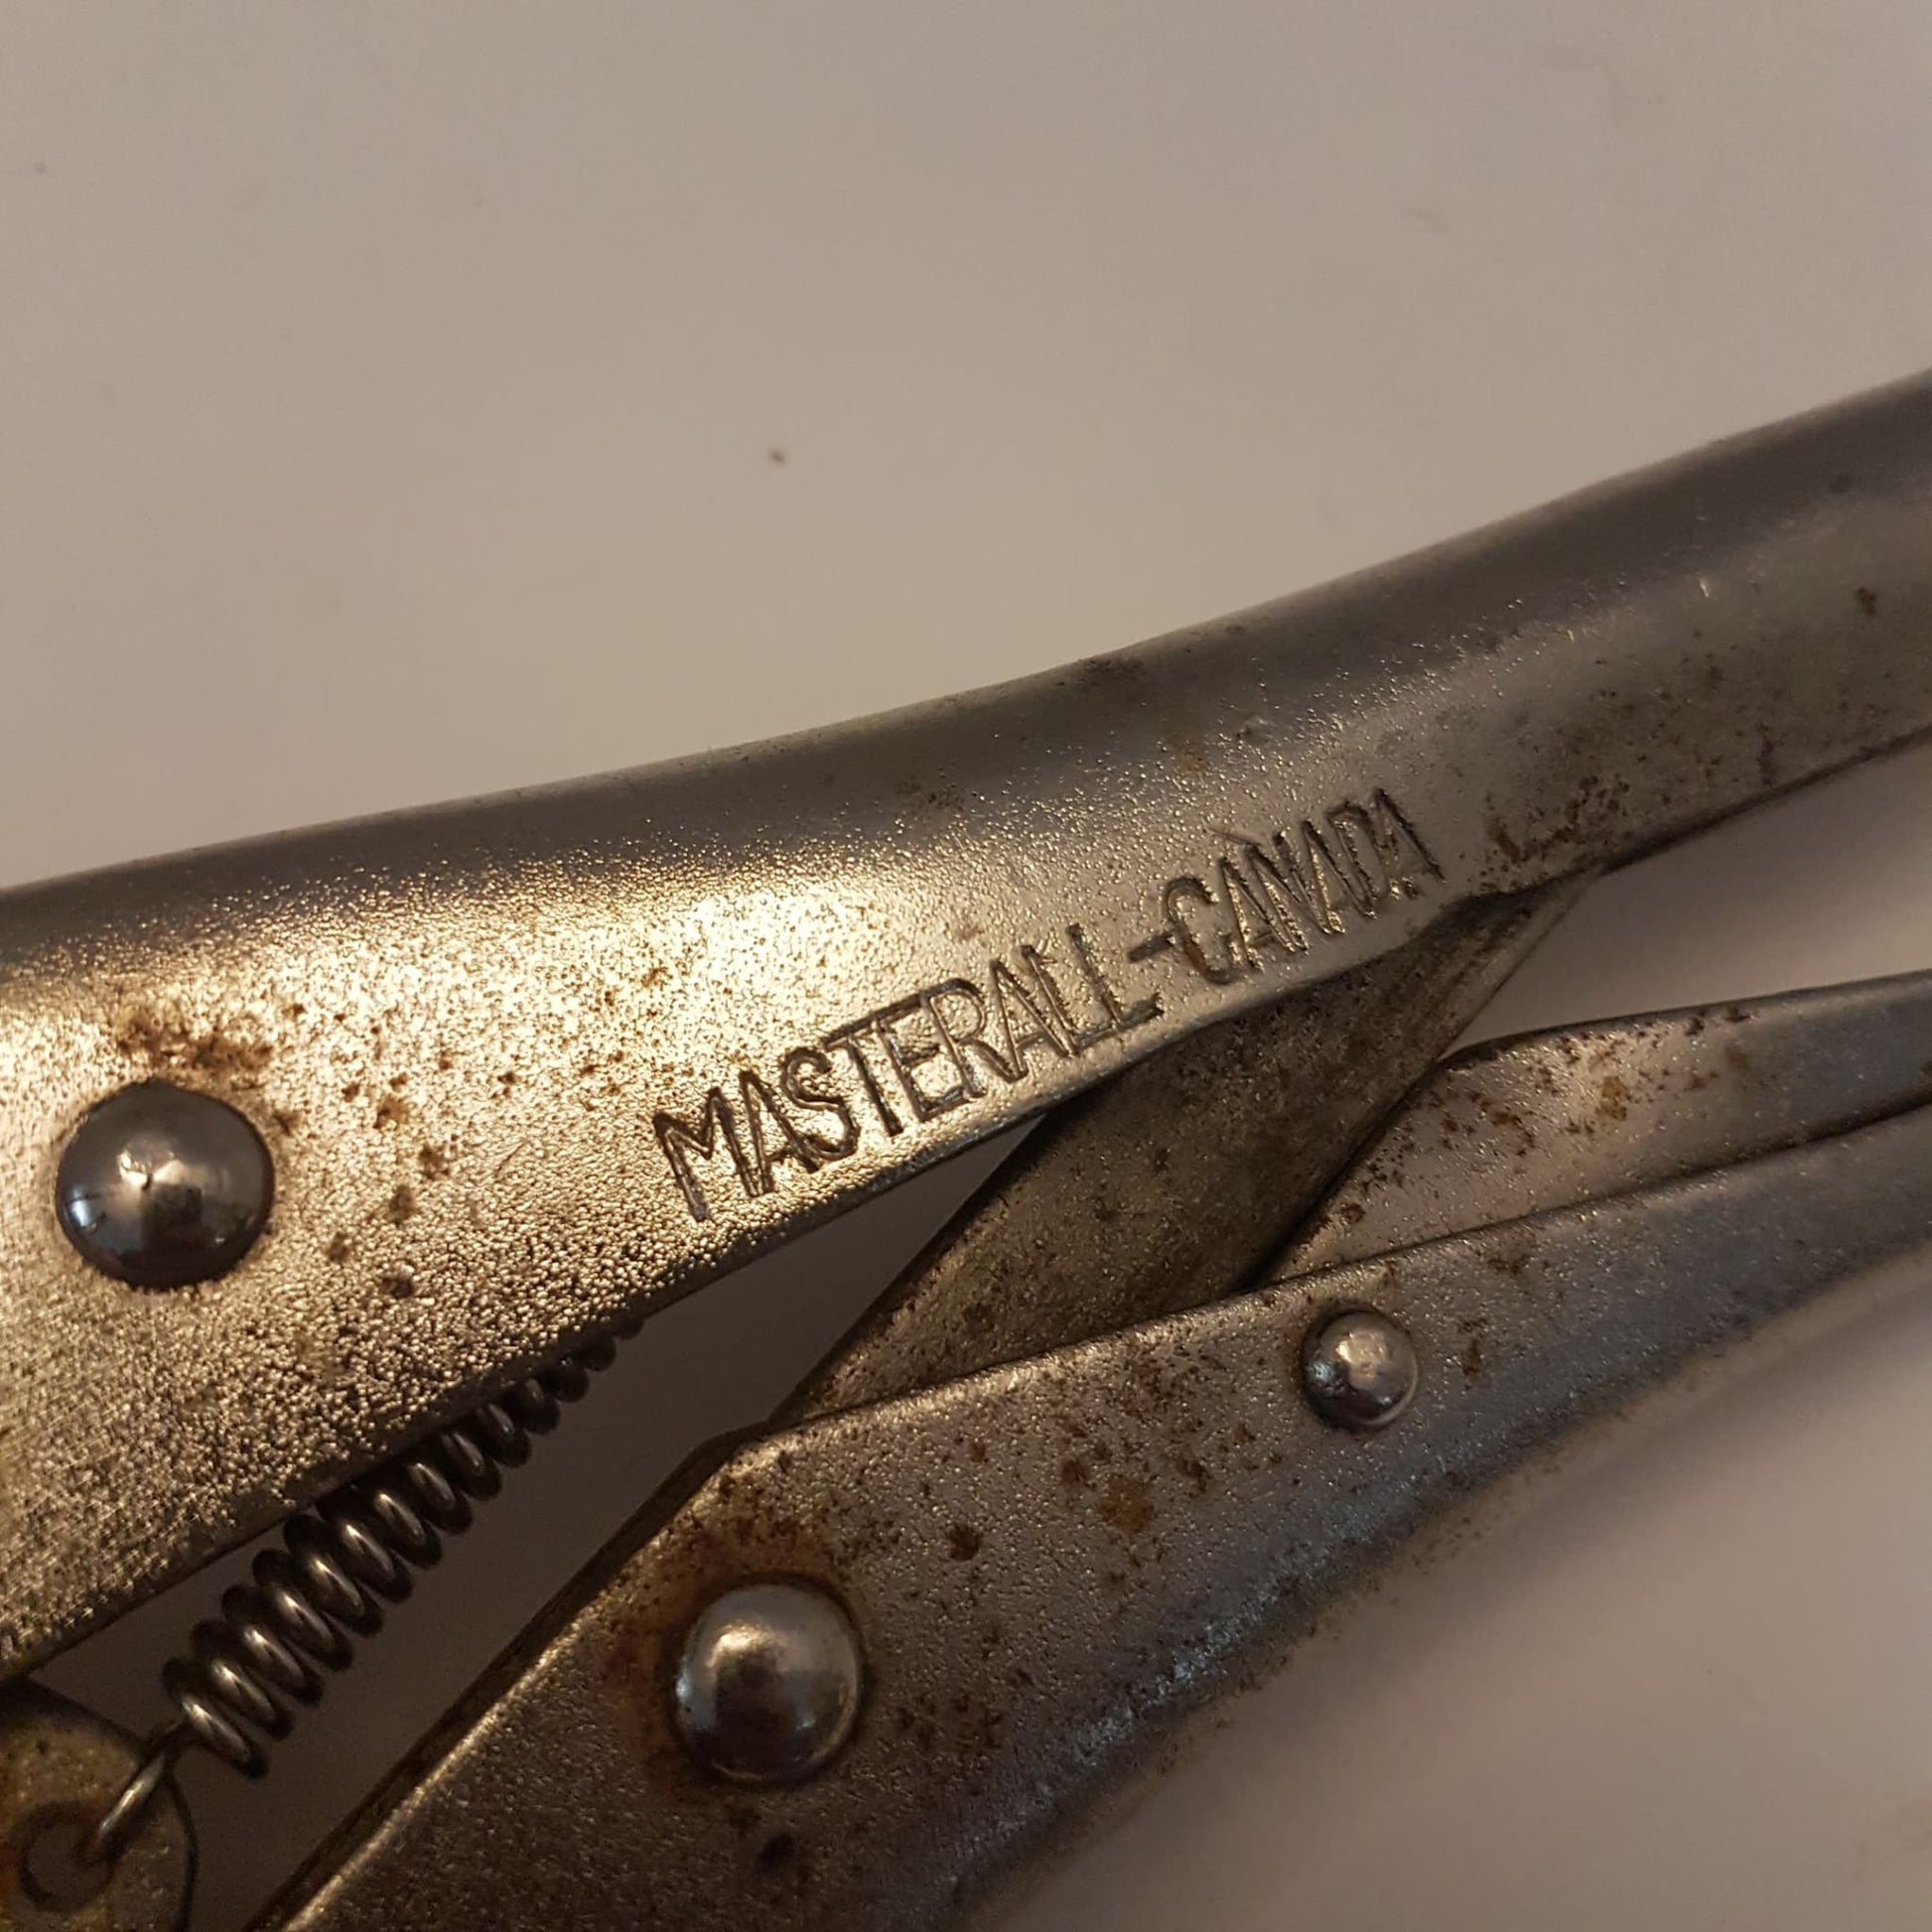 locking vise grip pliers - masterall canada